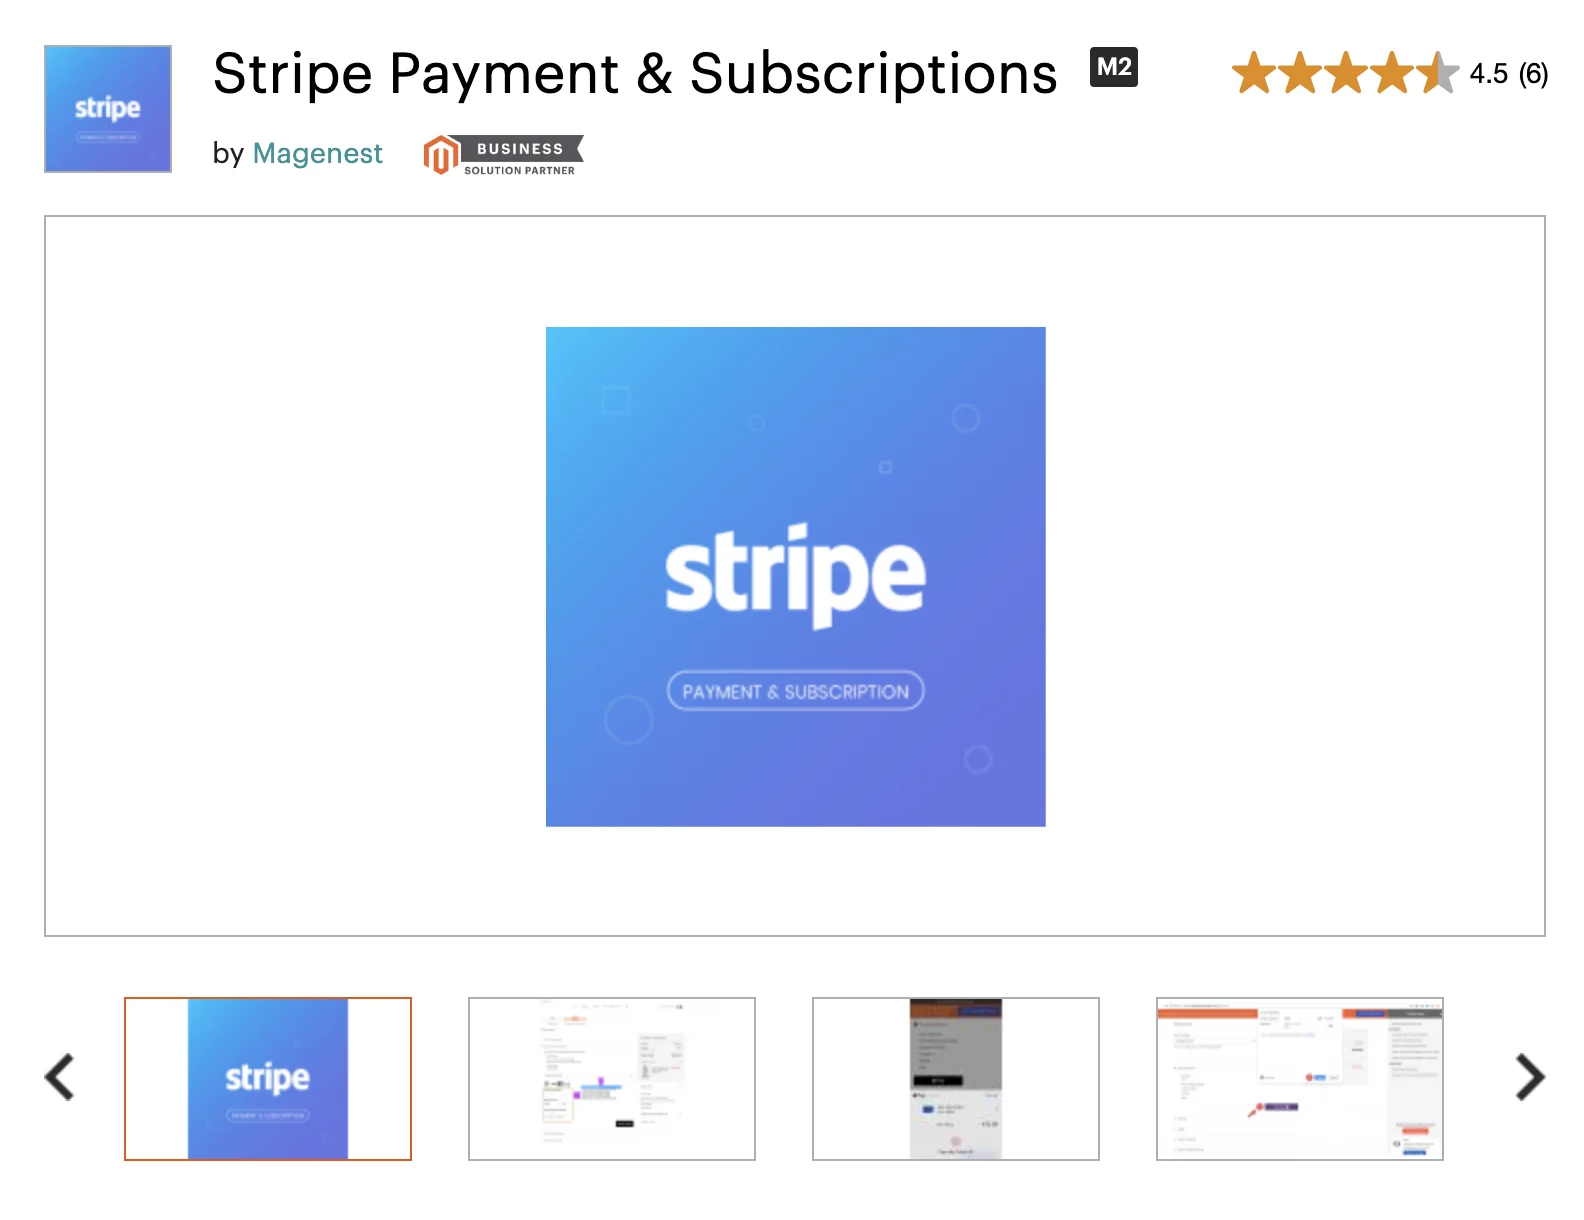 Stripe Payment Gateway and Subscriptions